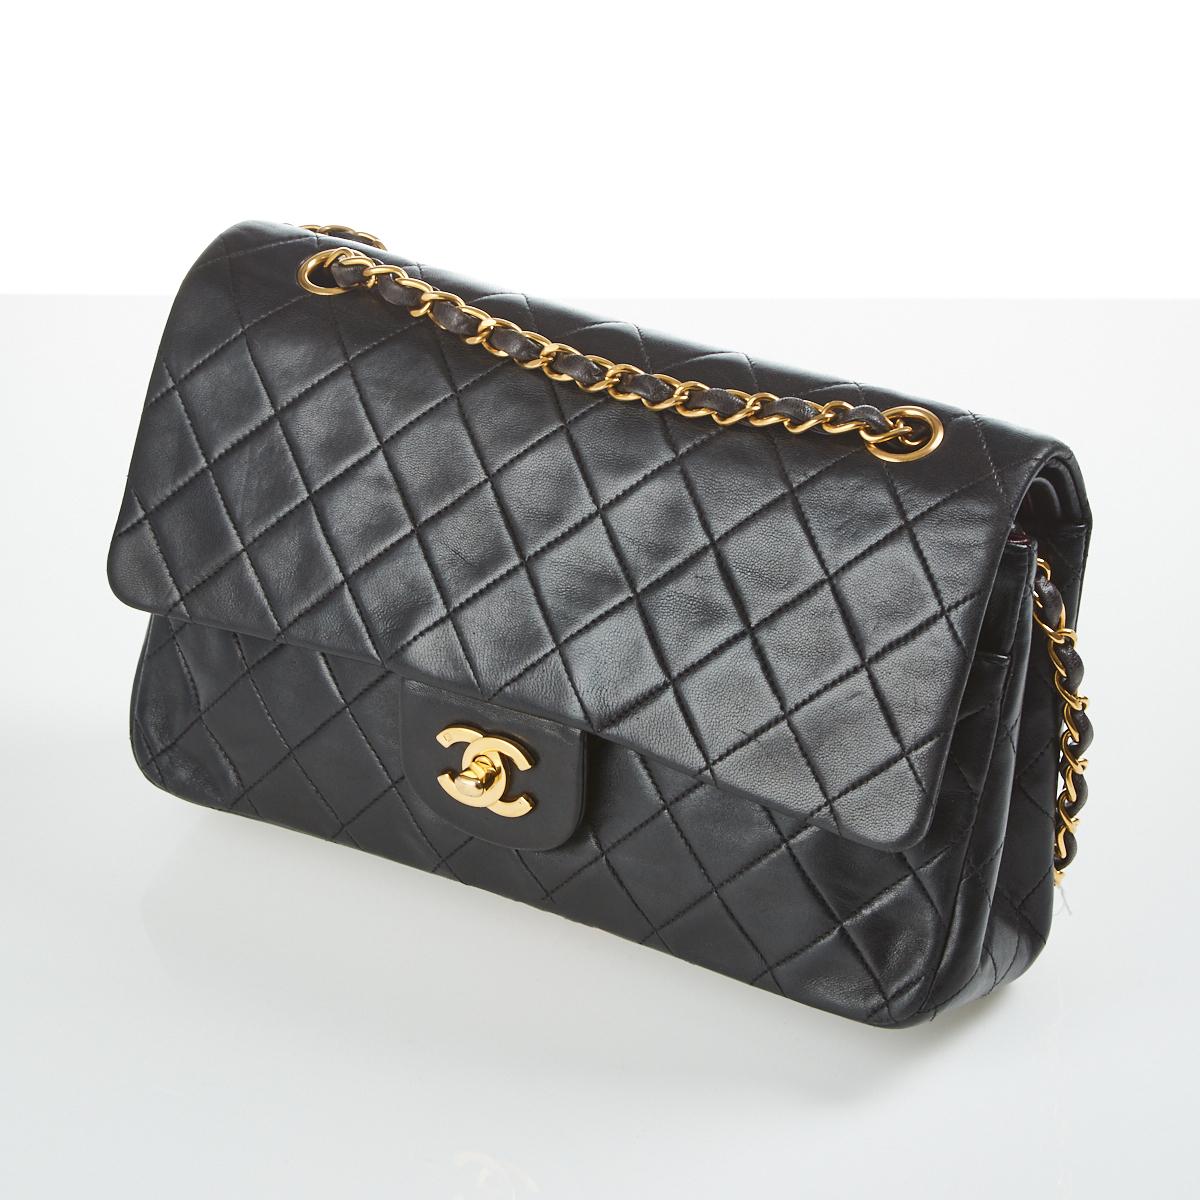 Buy Authentic, Preloved Chanel Vintage Quilted Lambskin Medium